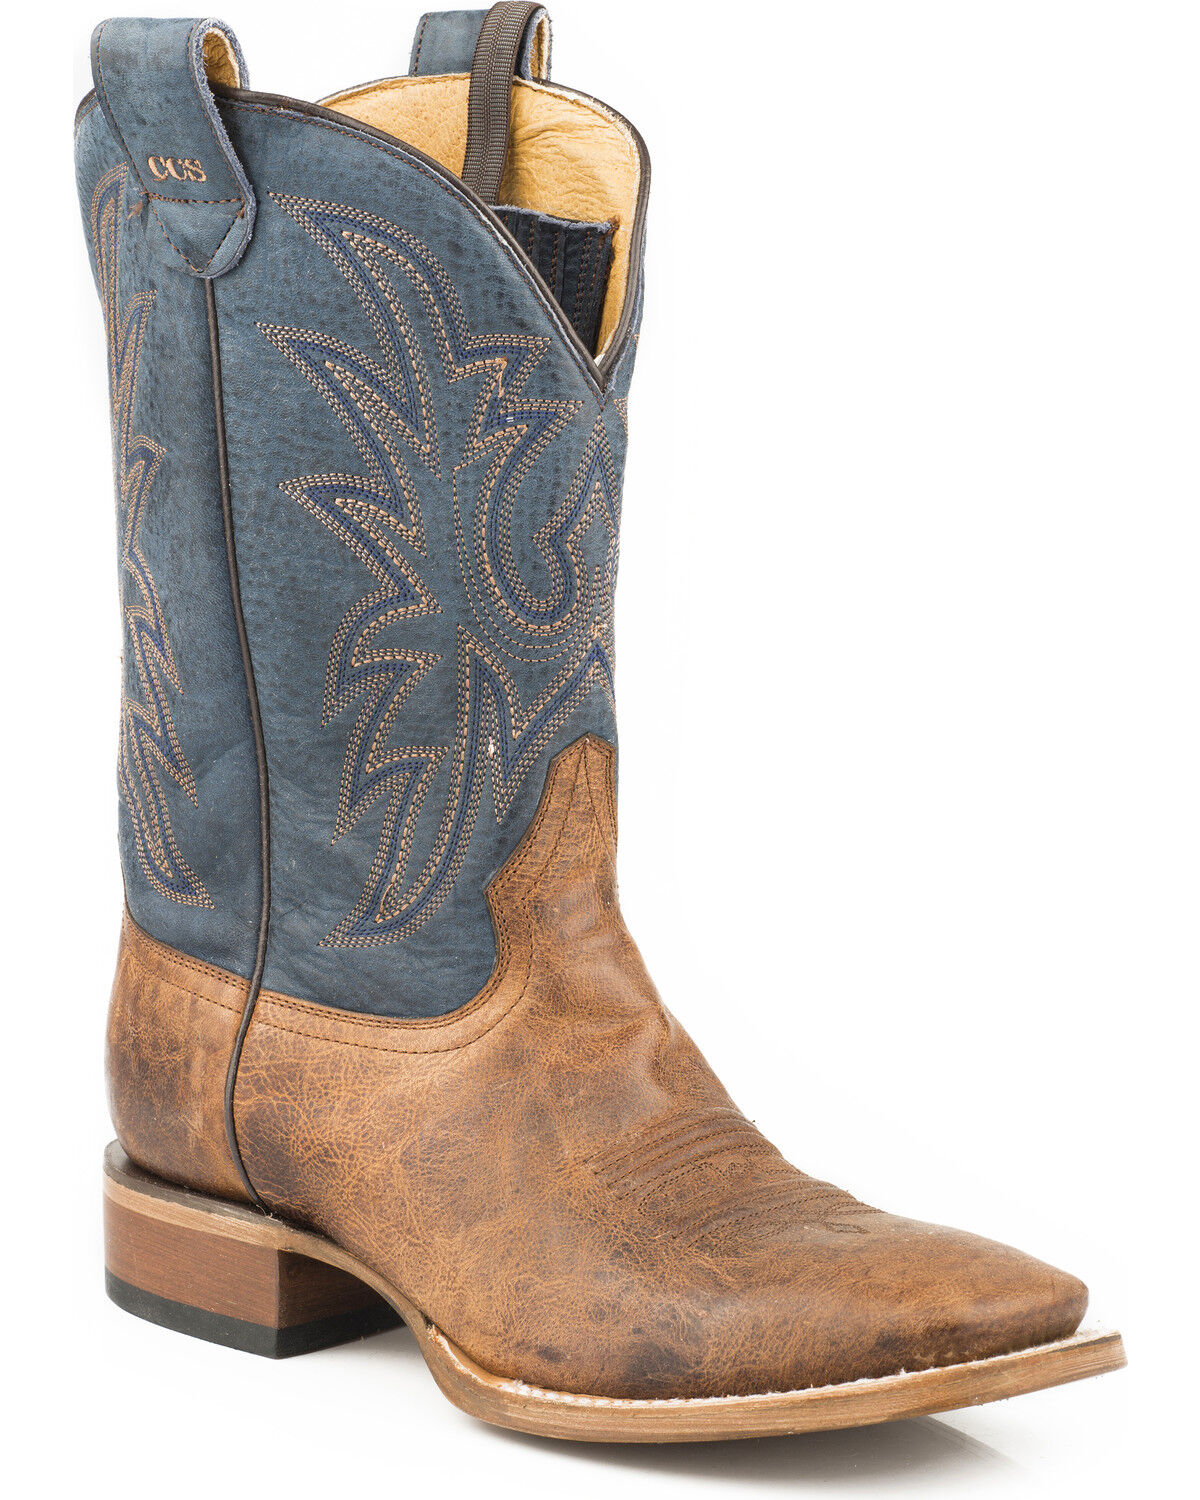 Men’s Roper Sting Concealed Carry Boots Handcrafted